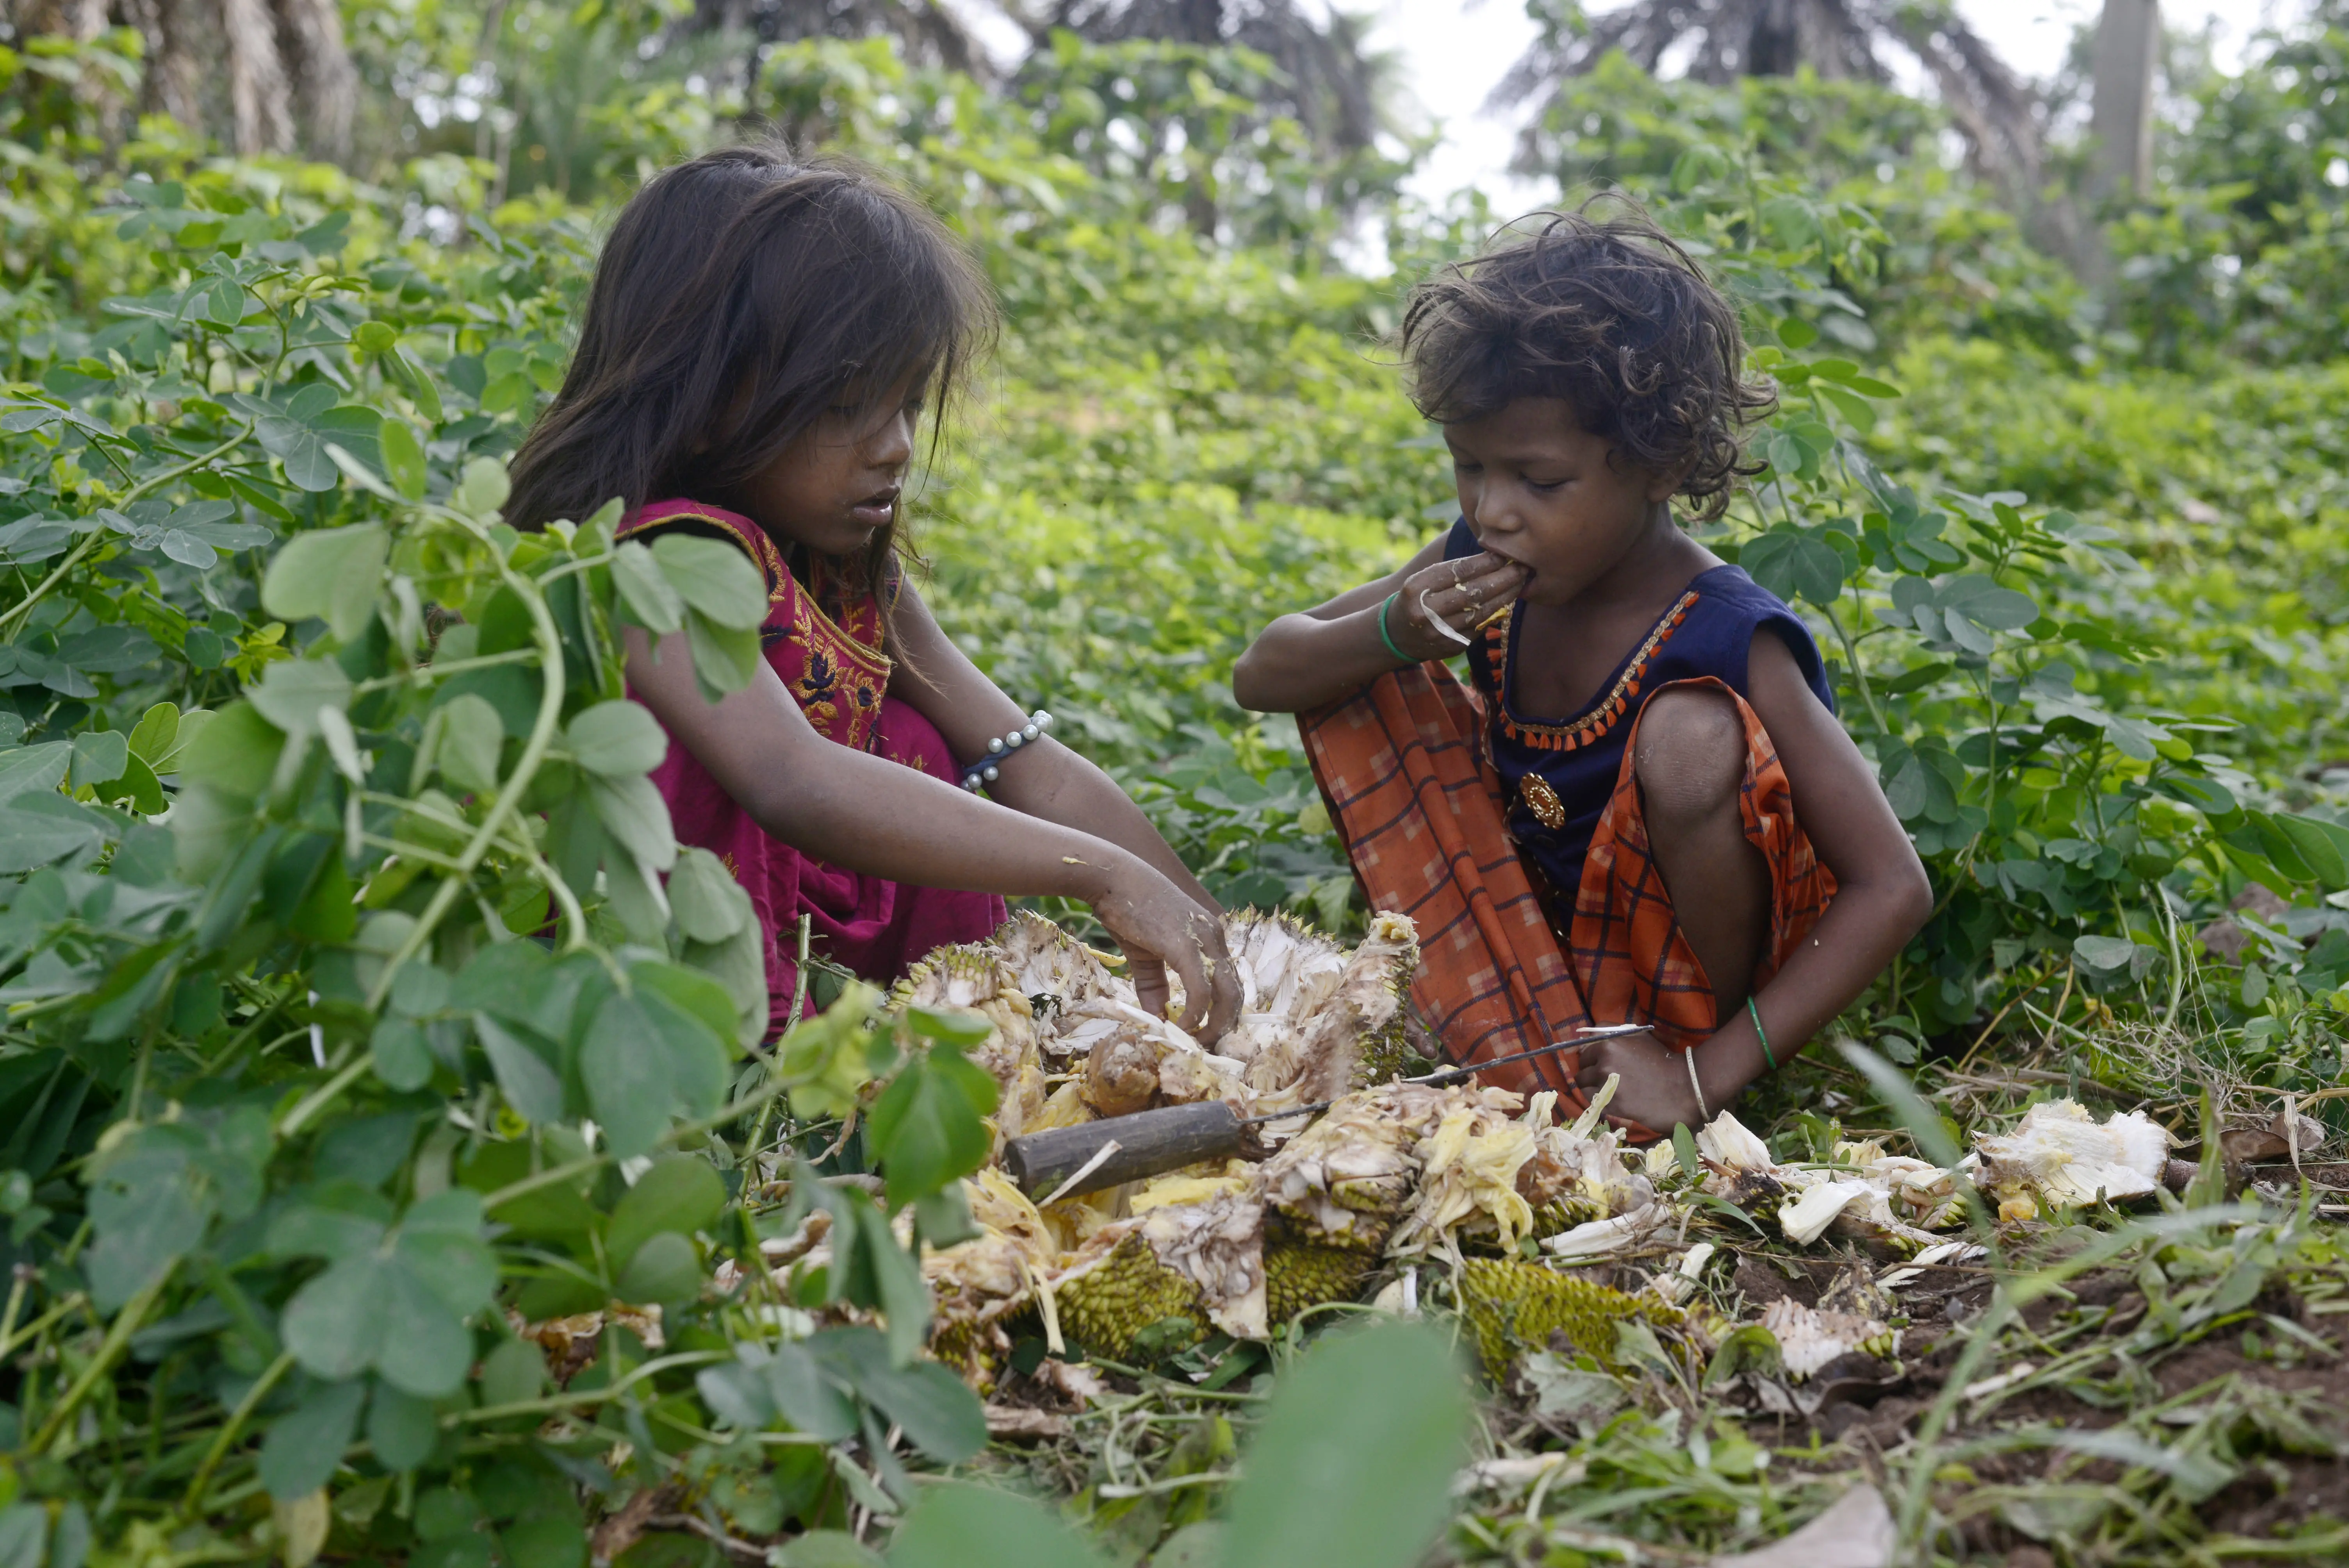 Two young children eat together in a forest area